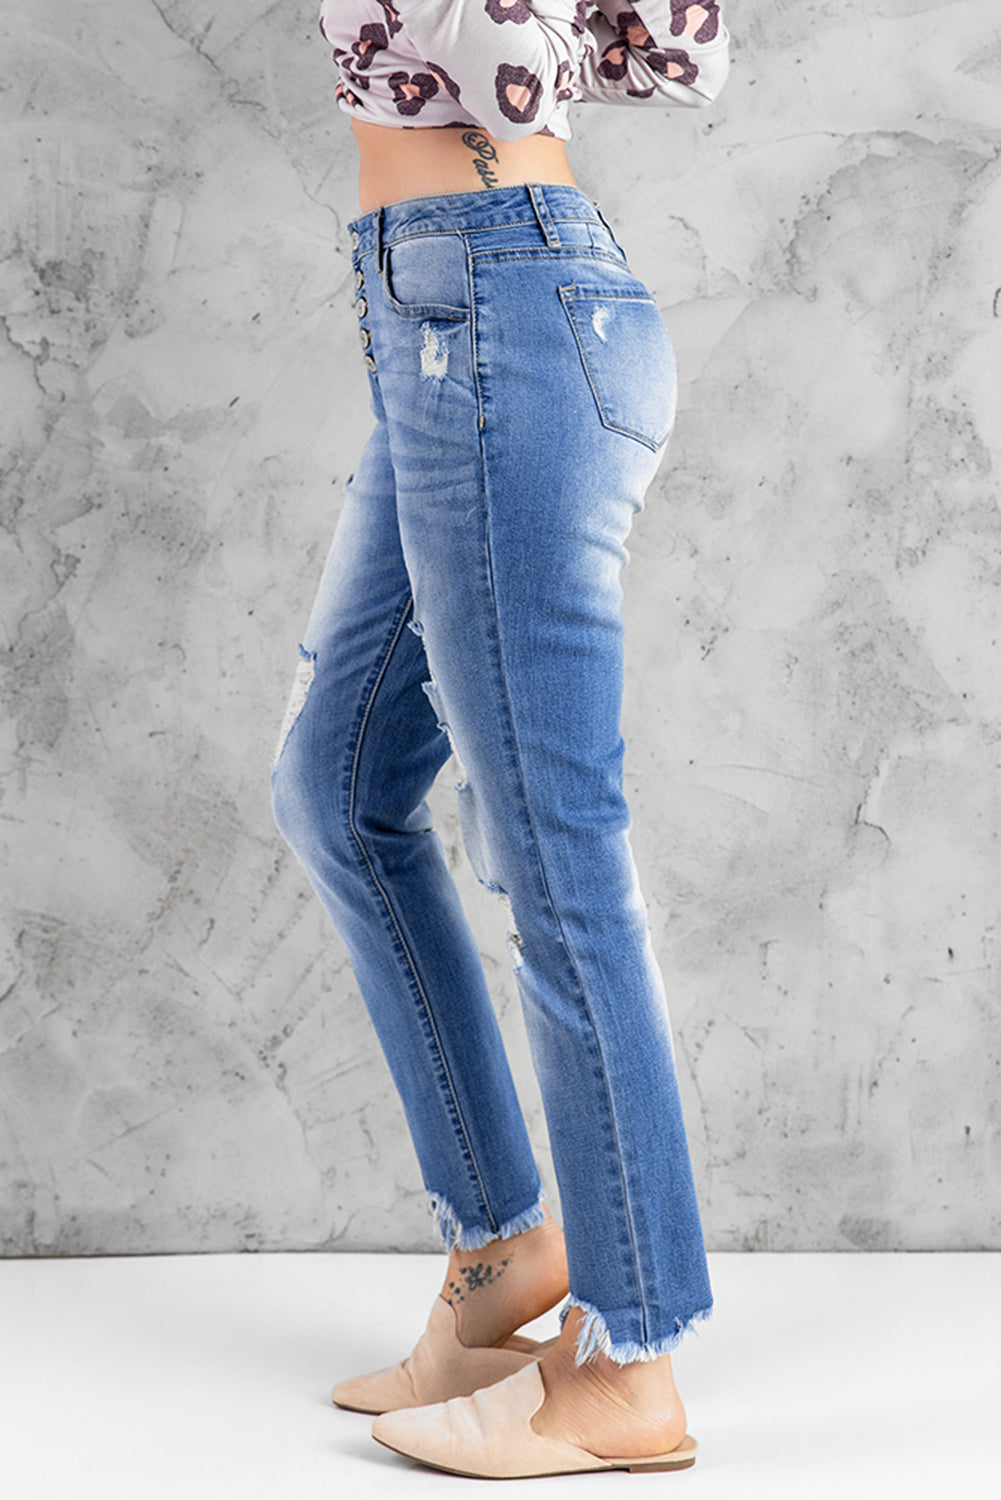 Sky Blue High Rise Button Front Frayed Ankle Skinny Jeans Jeans JT's Designer Fashion